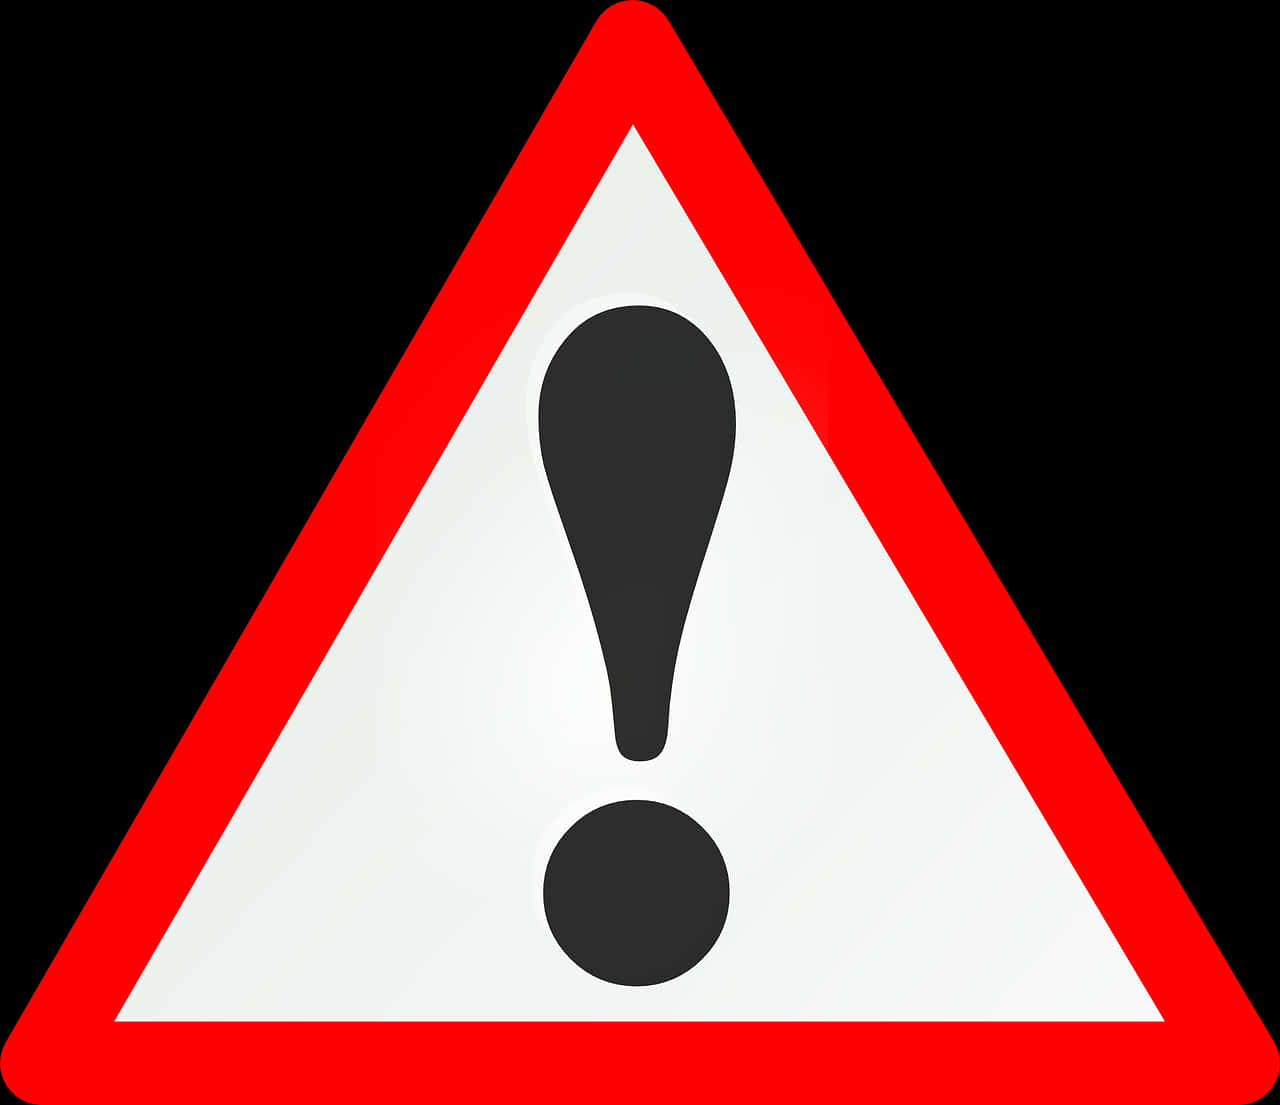 A Red And White Triangle Sign With A Black Exclamation Mark